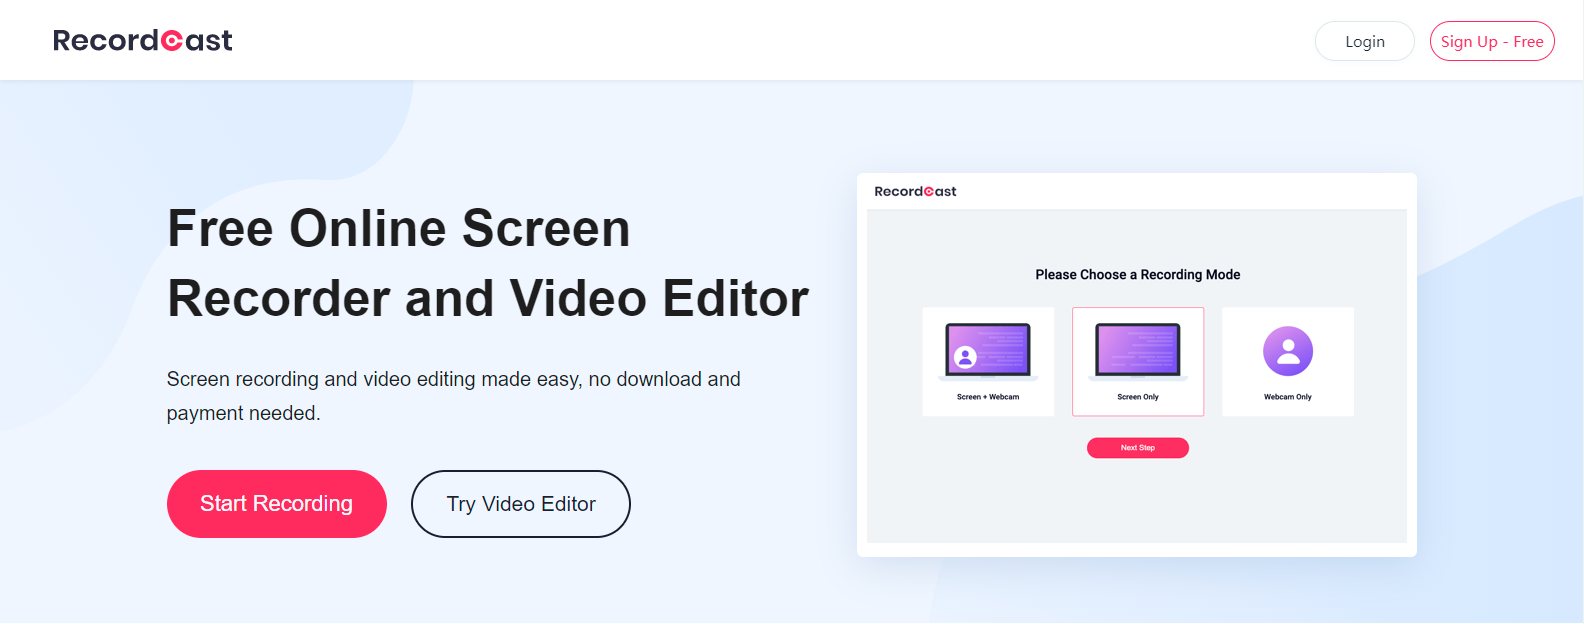 RecordCast, record your screen for free in a simple way